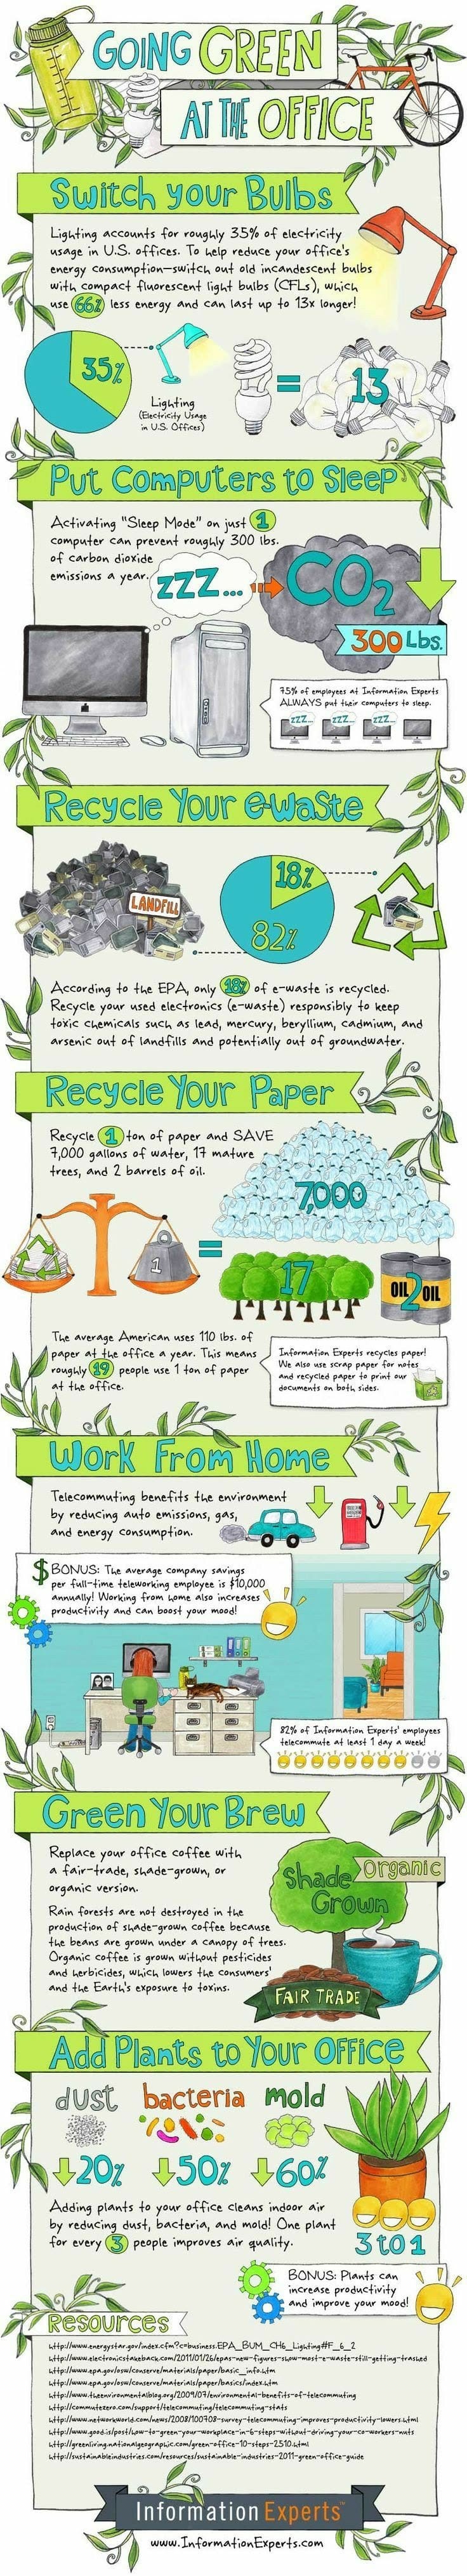 Steps for going green at your office